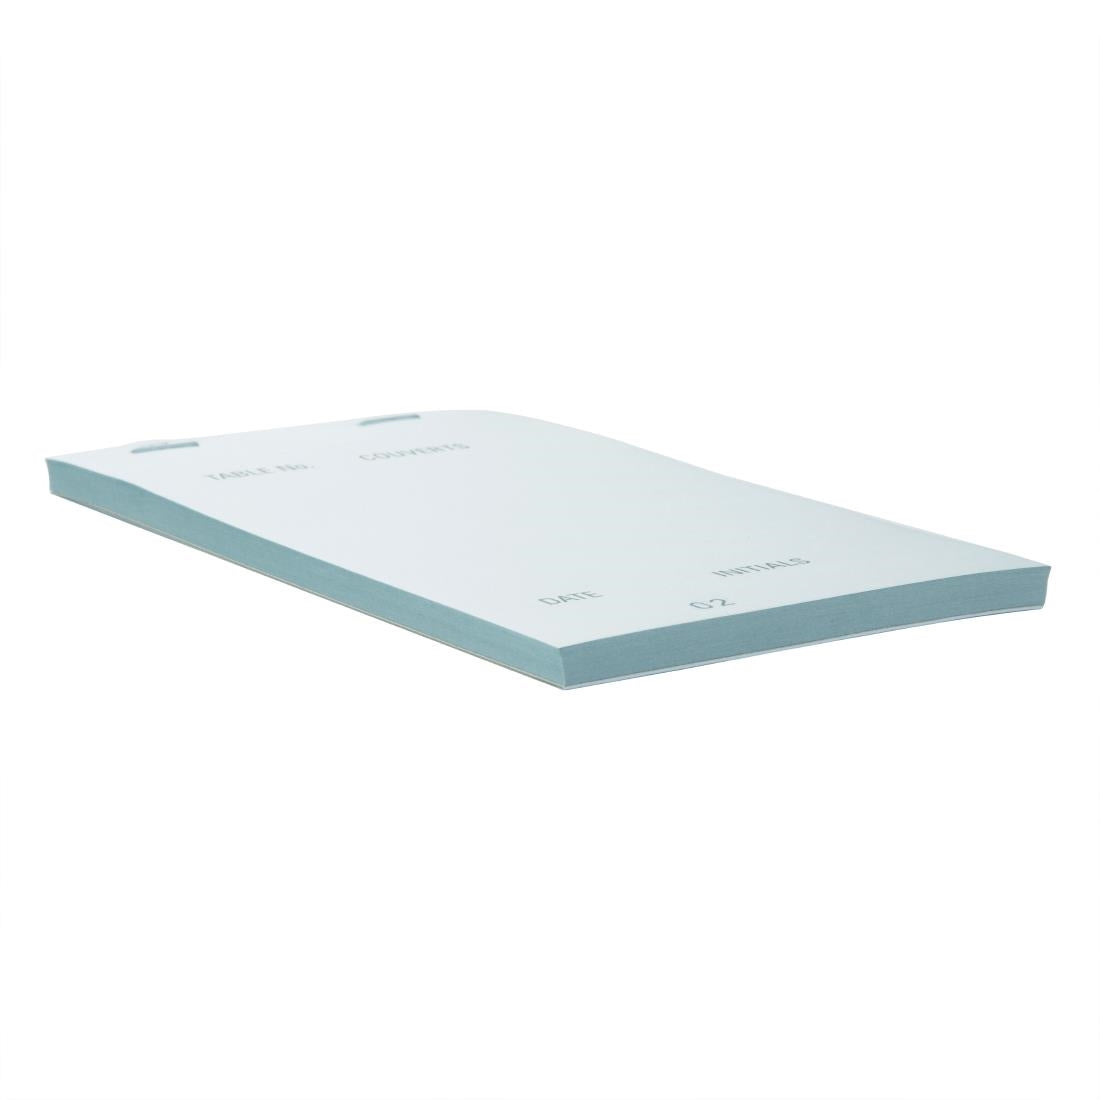 G523 Carbonless Waiter Pad Duplicate Large (Pack of 50) JD Catering Equipment Solutions Ltd